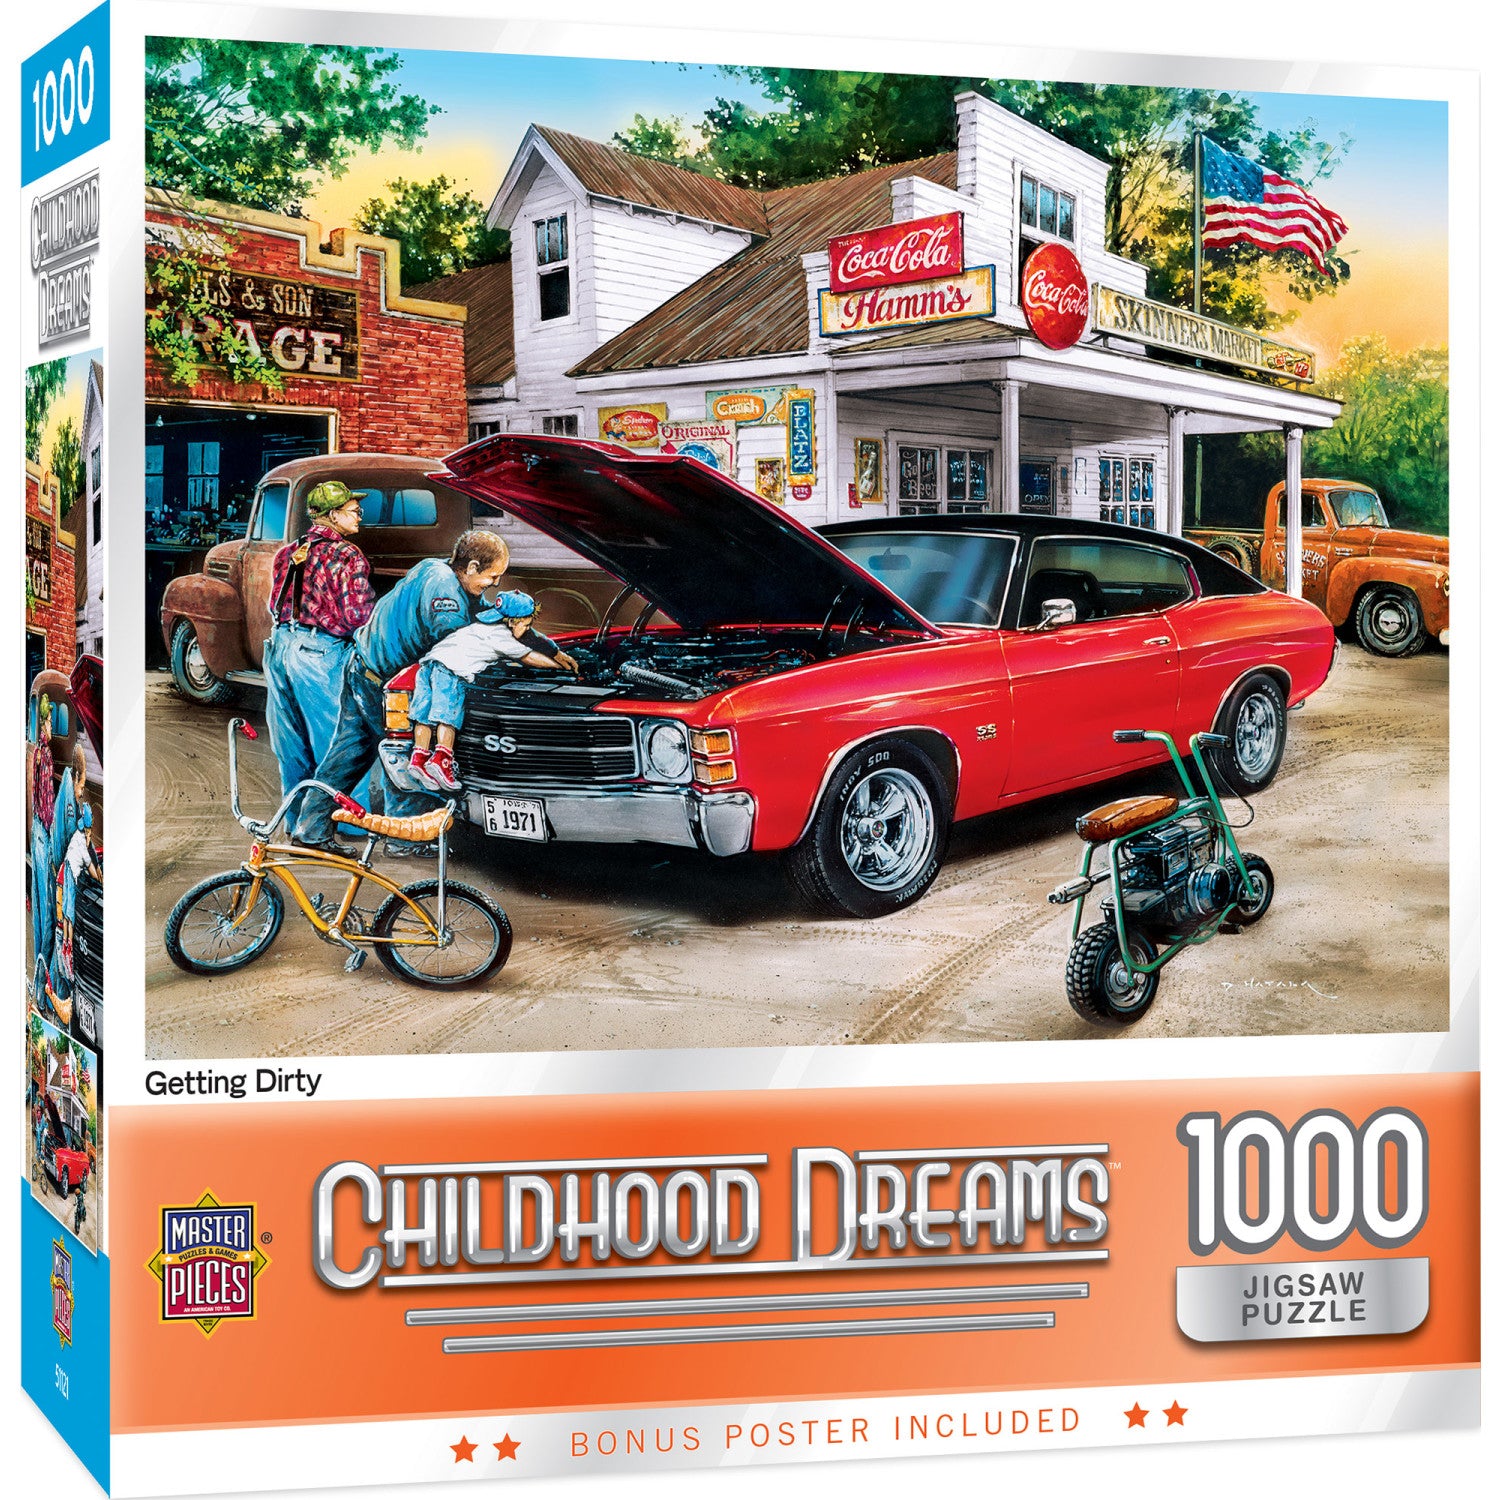 Childhood Dreams - Getting Dirty 1000 Piece Jigsaw Puzzle